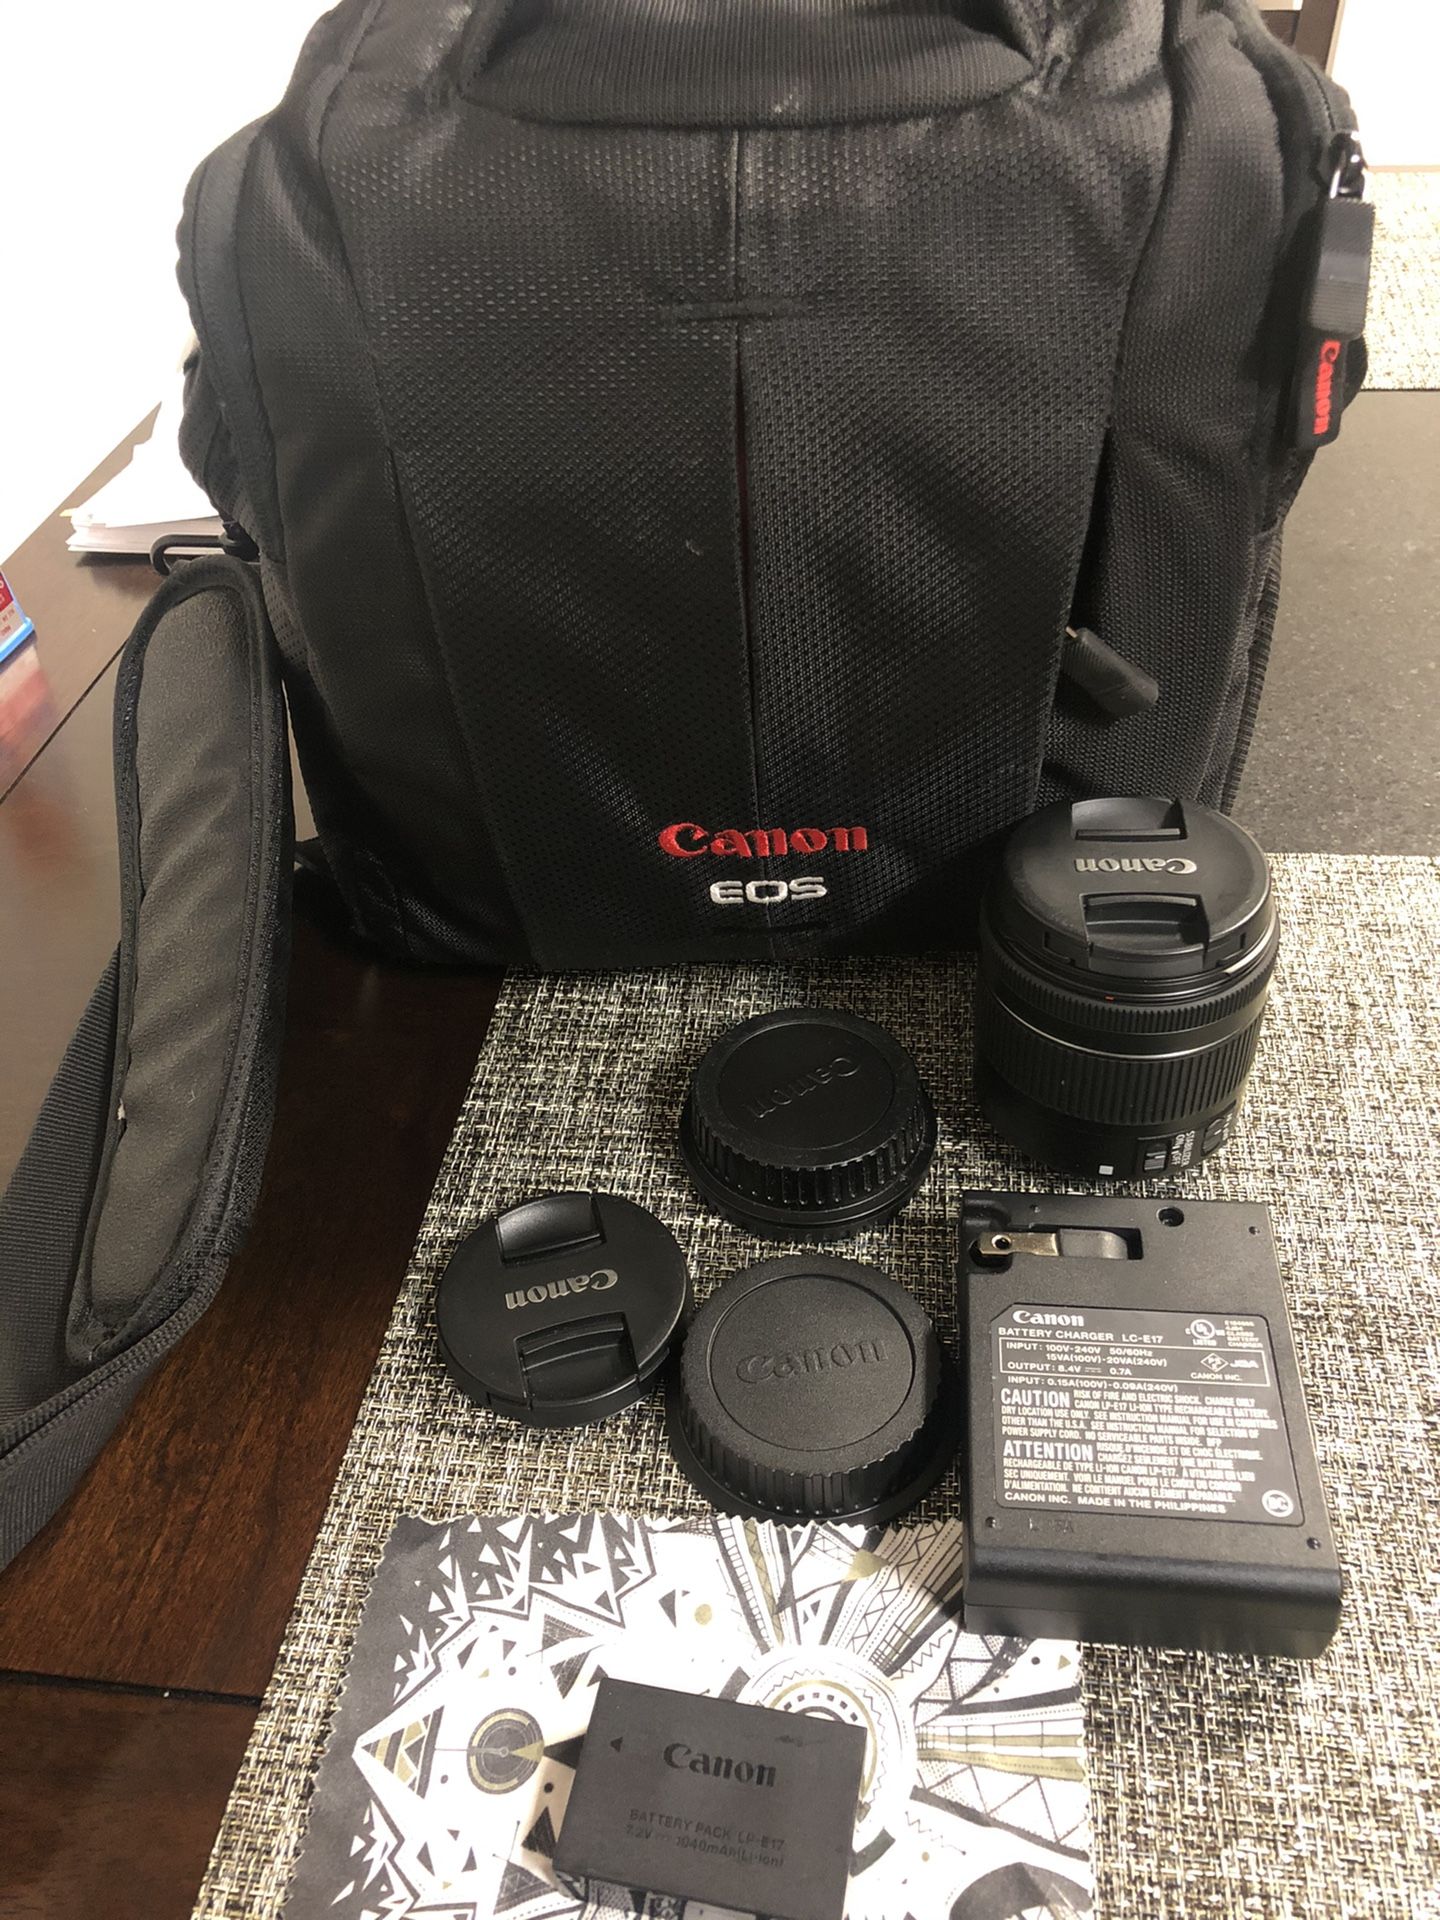 Canon camera bag - lens- battery - charger